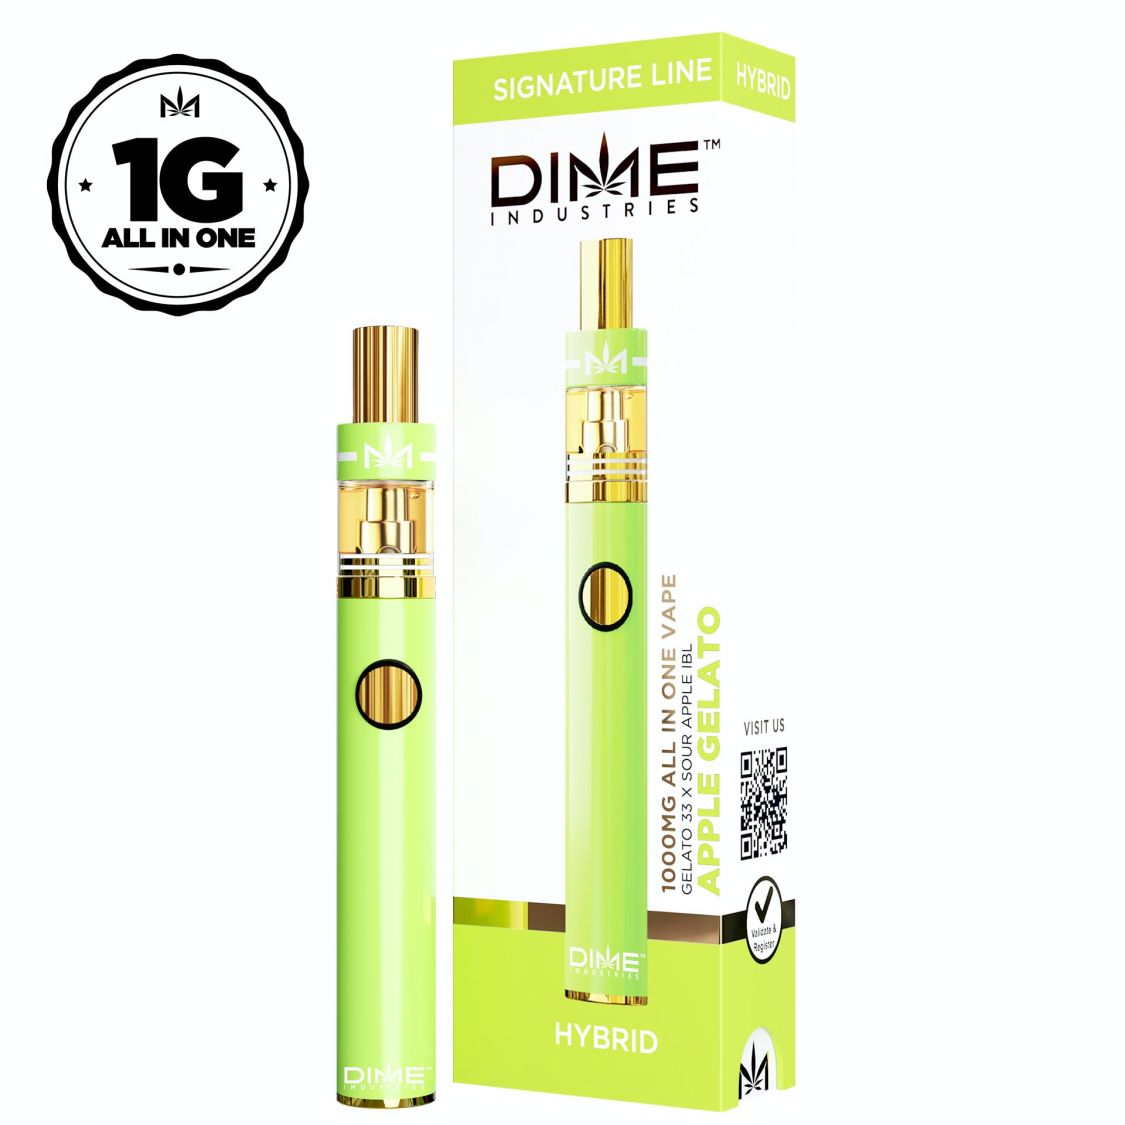 DIME Industries Apple Gelato All-In-One Disposable Vaporizers Disposable